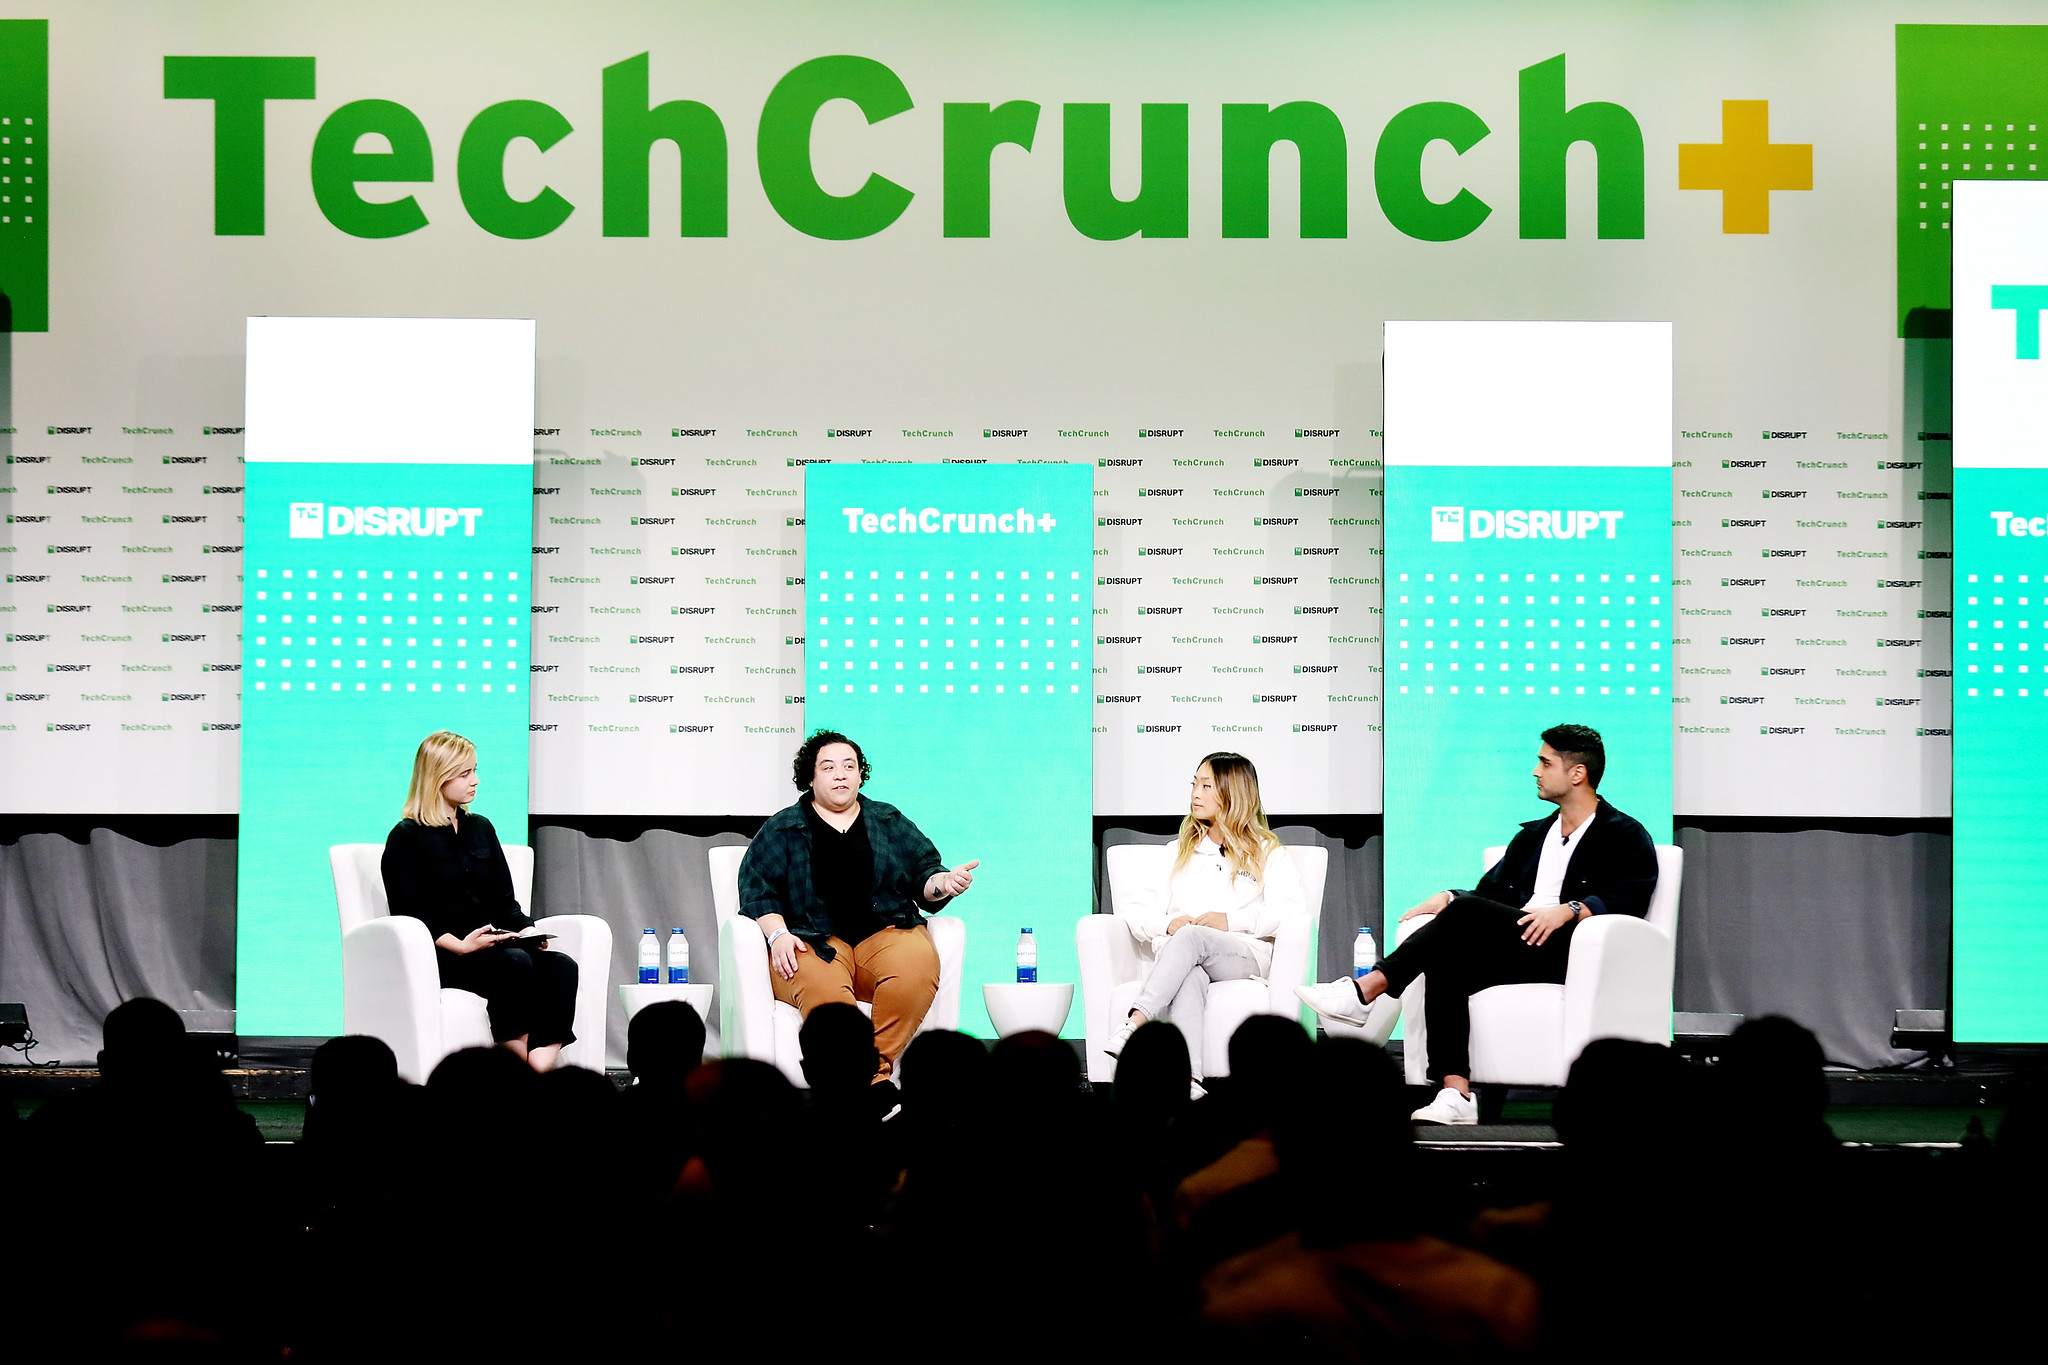 Rebecca Szkutak, senior writer at TechCrunch+;  Amanda DoAmaral, Co-Founder and CEO, Fiveable;  Sara Du, Co-Founder and CEO, Alloy Automation;  and Arman Hezarkhani, Founder and CEO, Parthean speaking on stage at TechCrunch Disrupt 2022.